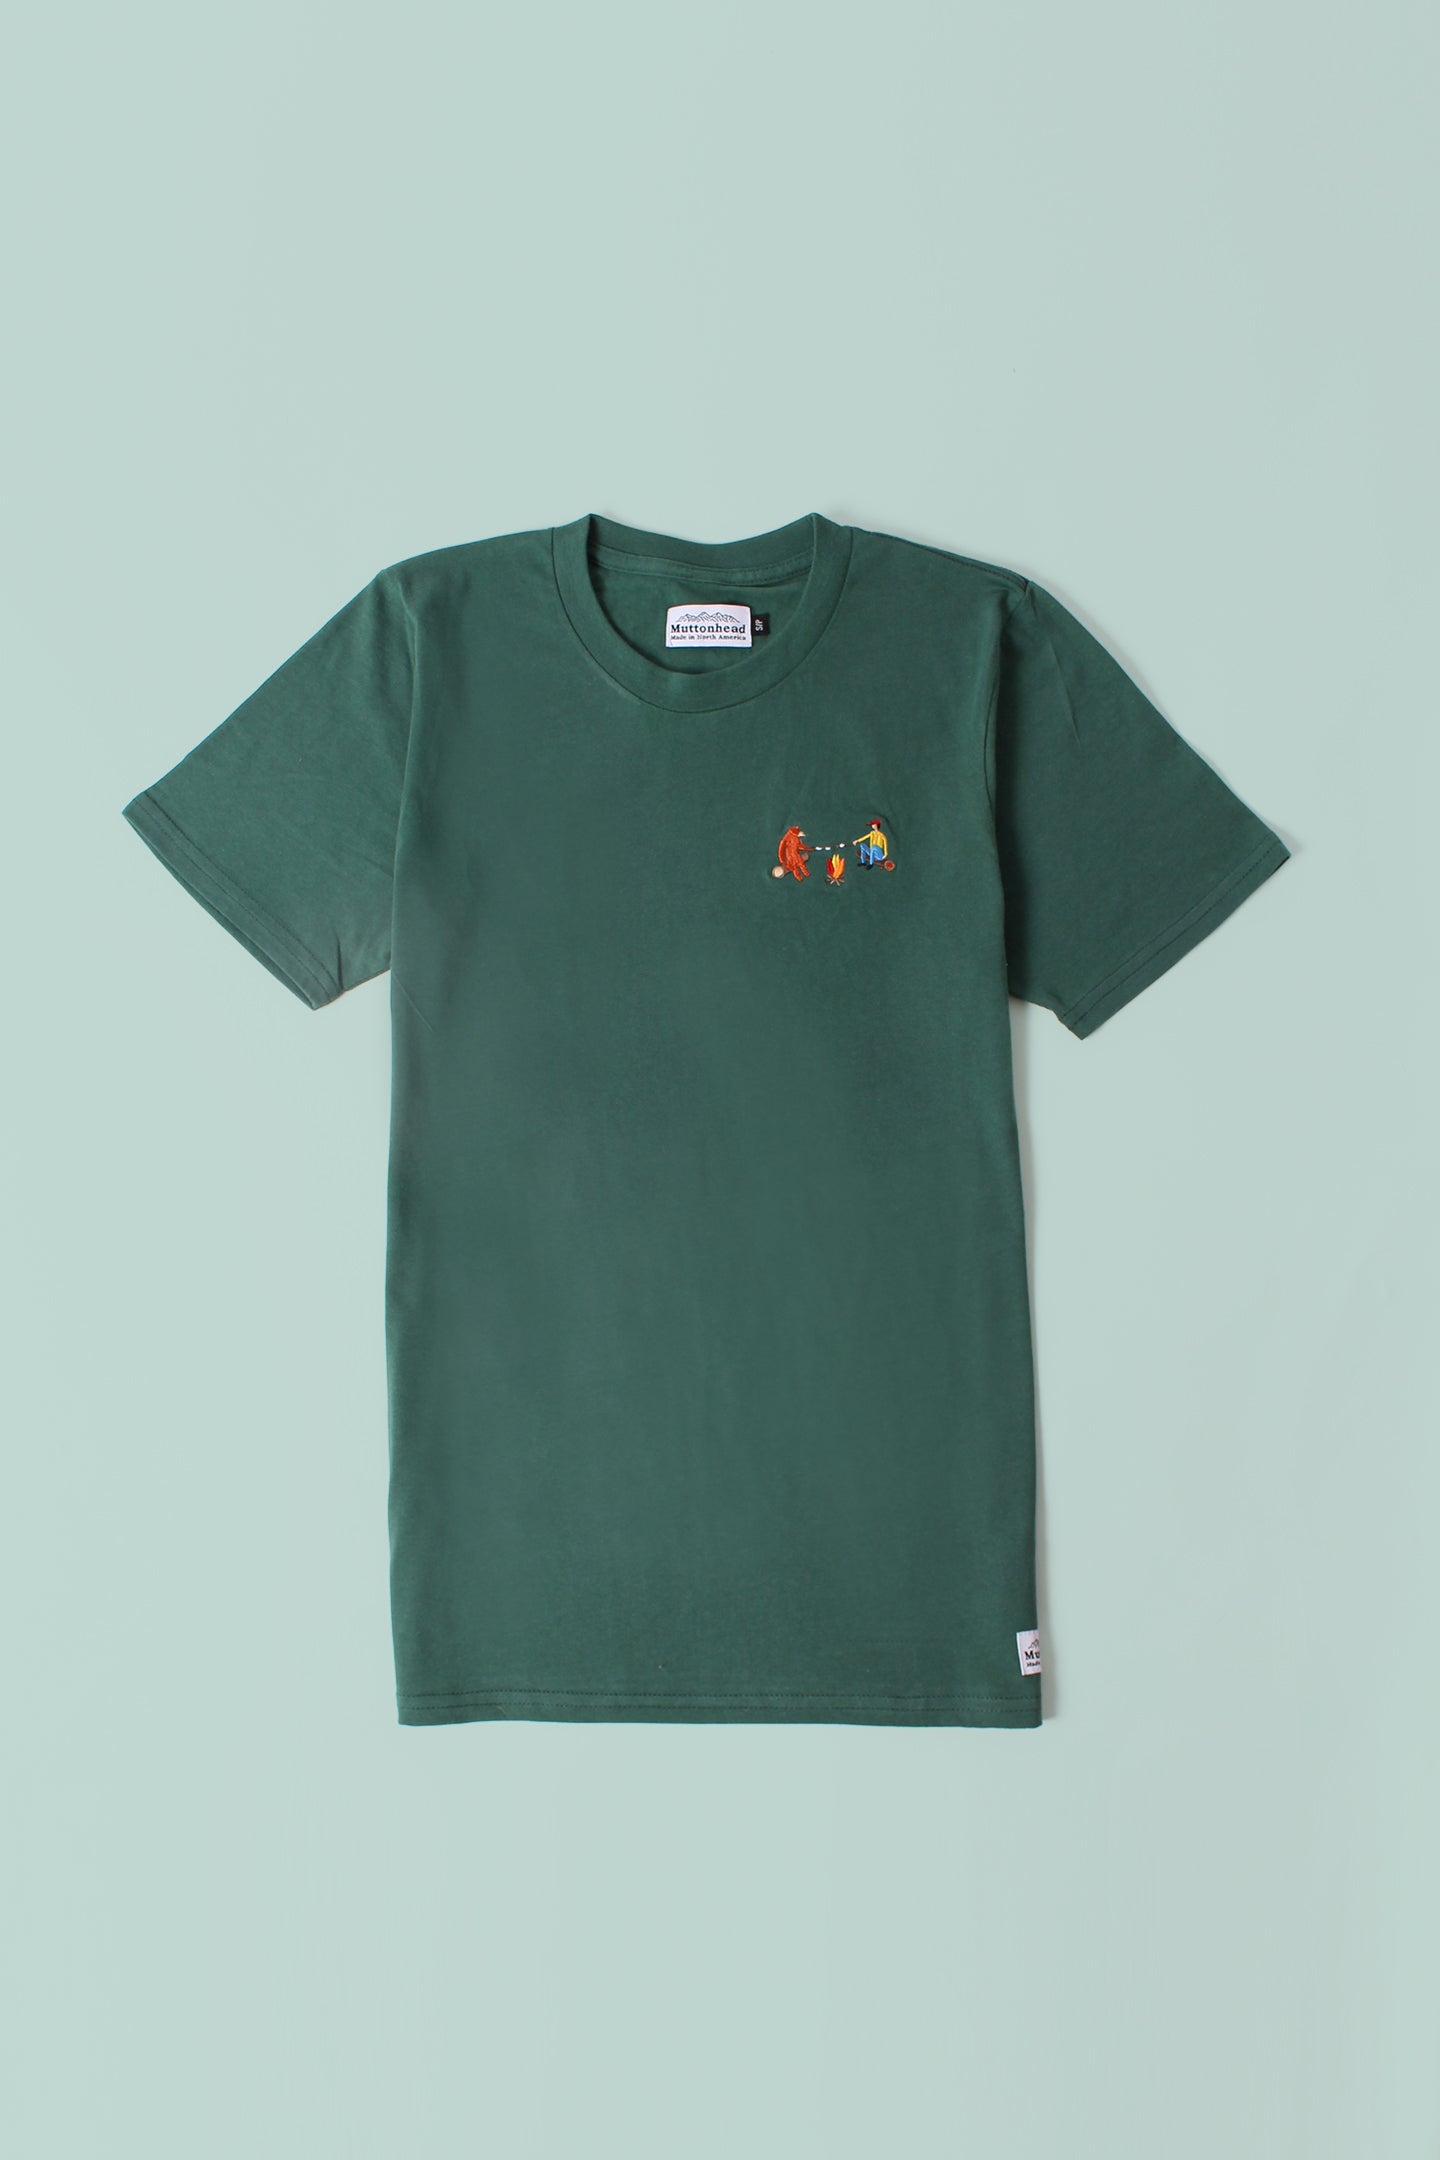 Classic Tee - Forest - Campfire Friends Embroidery - CAMP Series